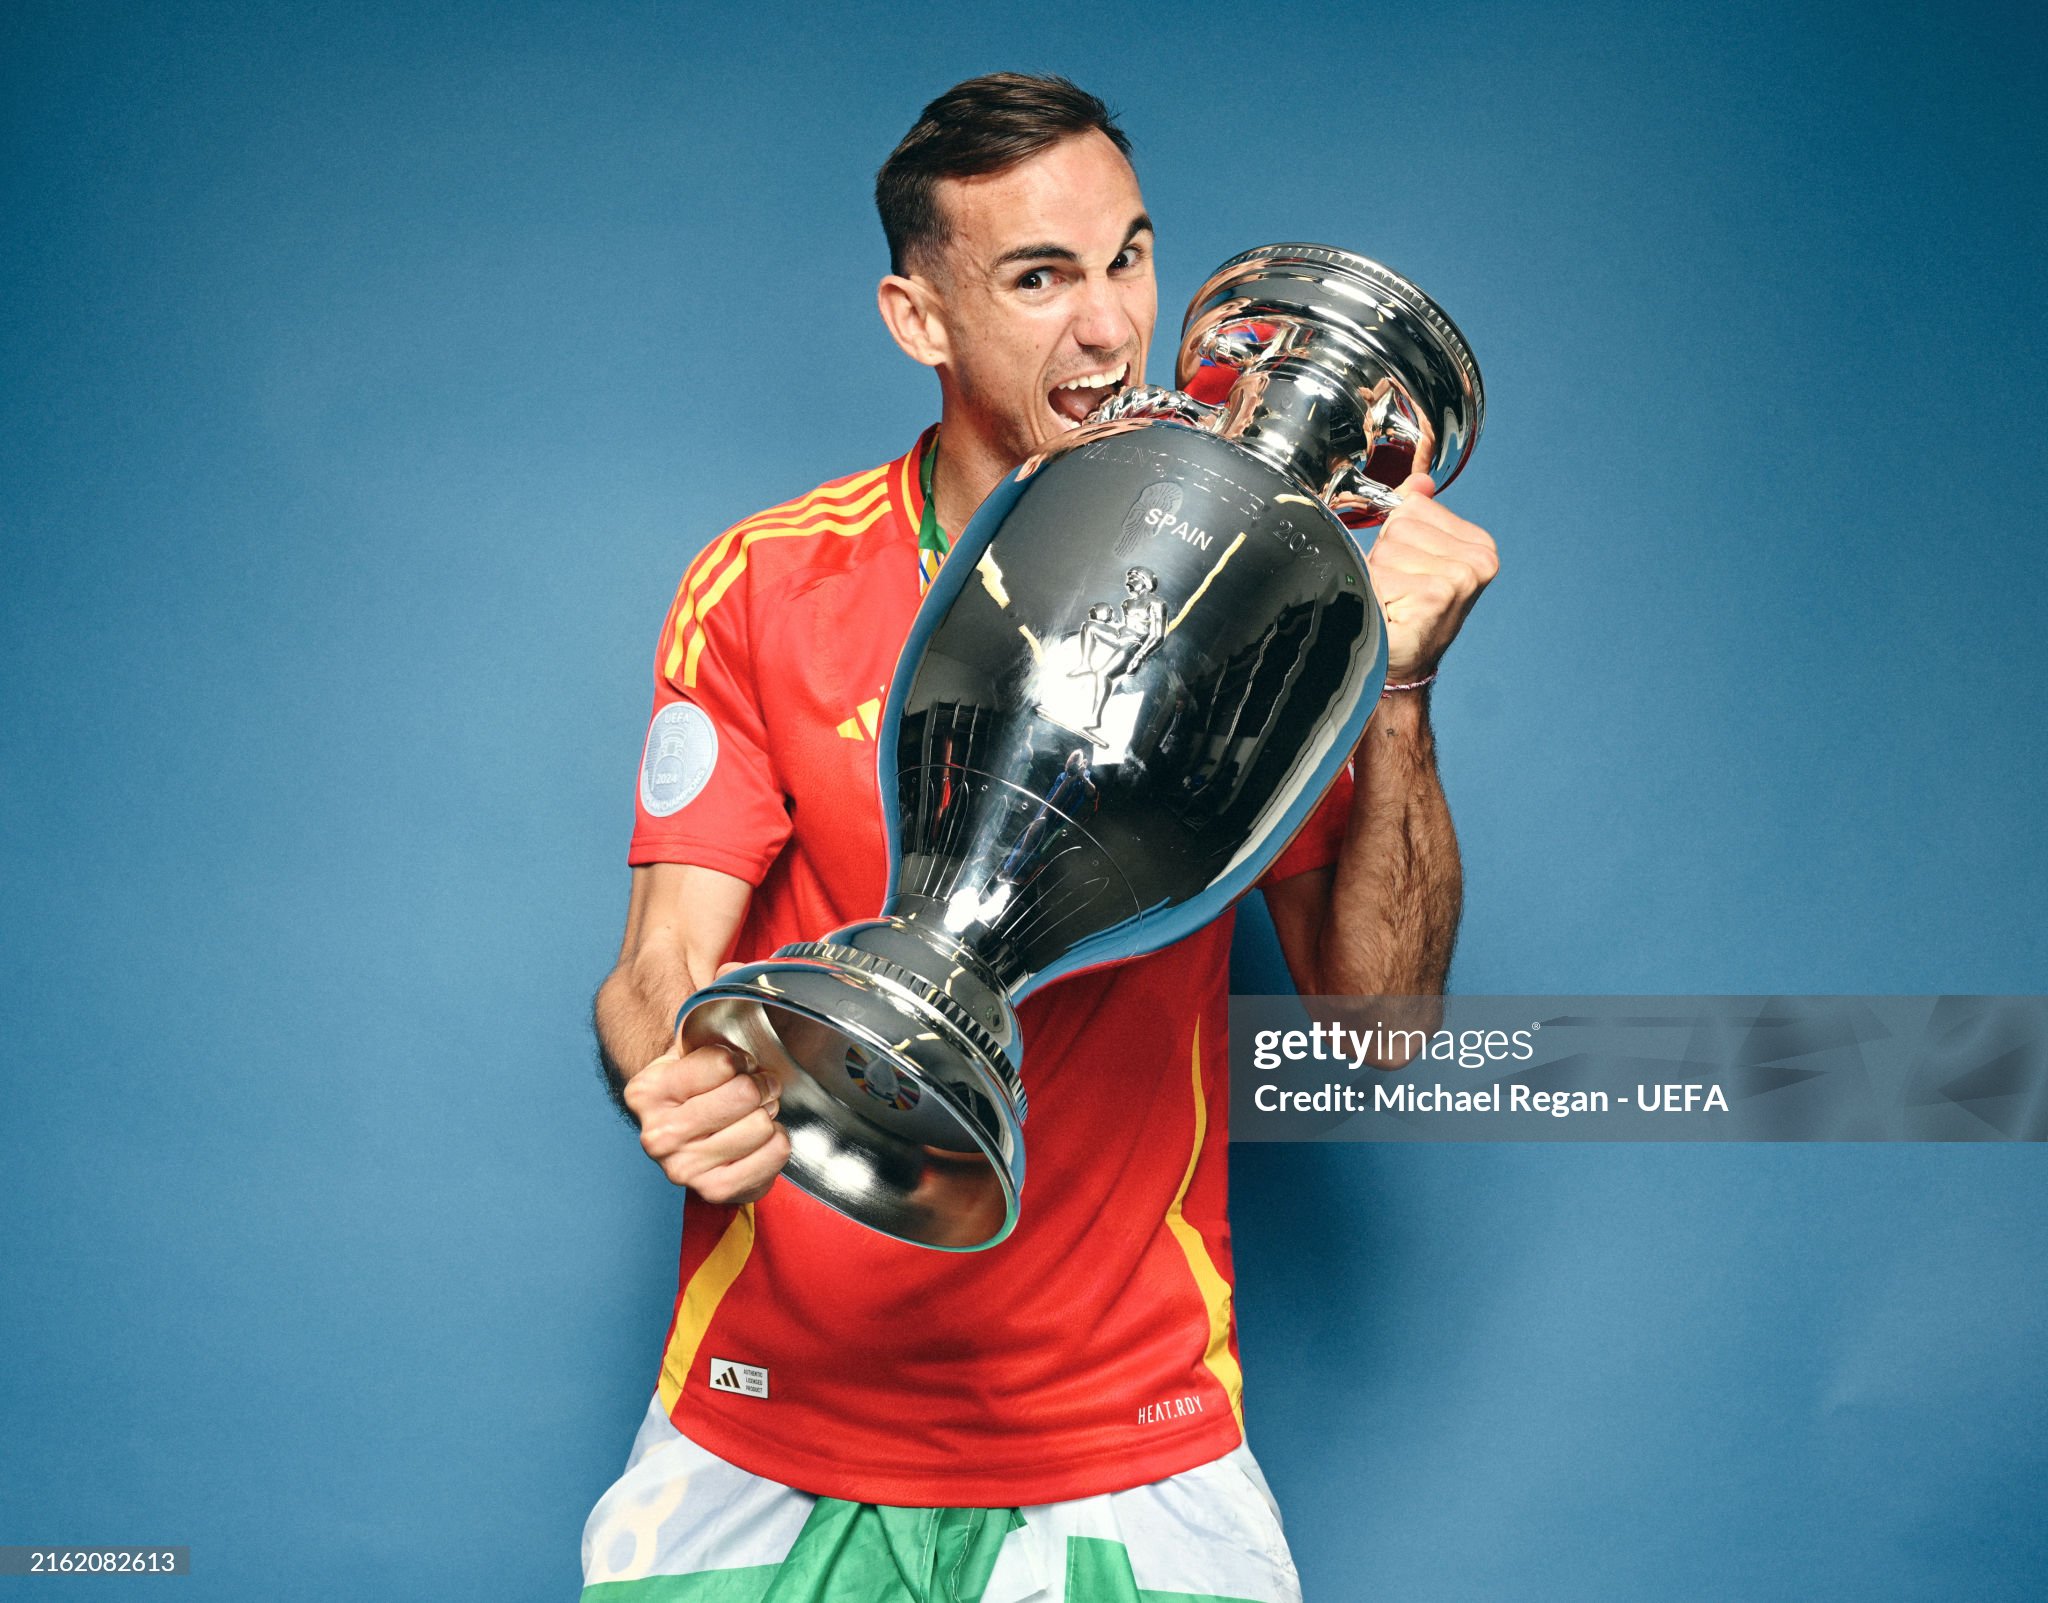 gettyimages-2162082613-2048x2048.jpg